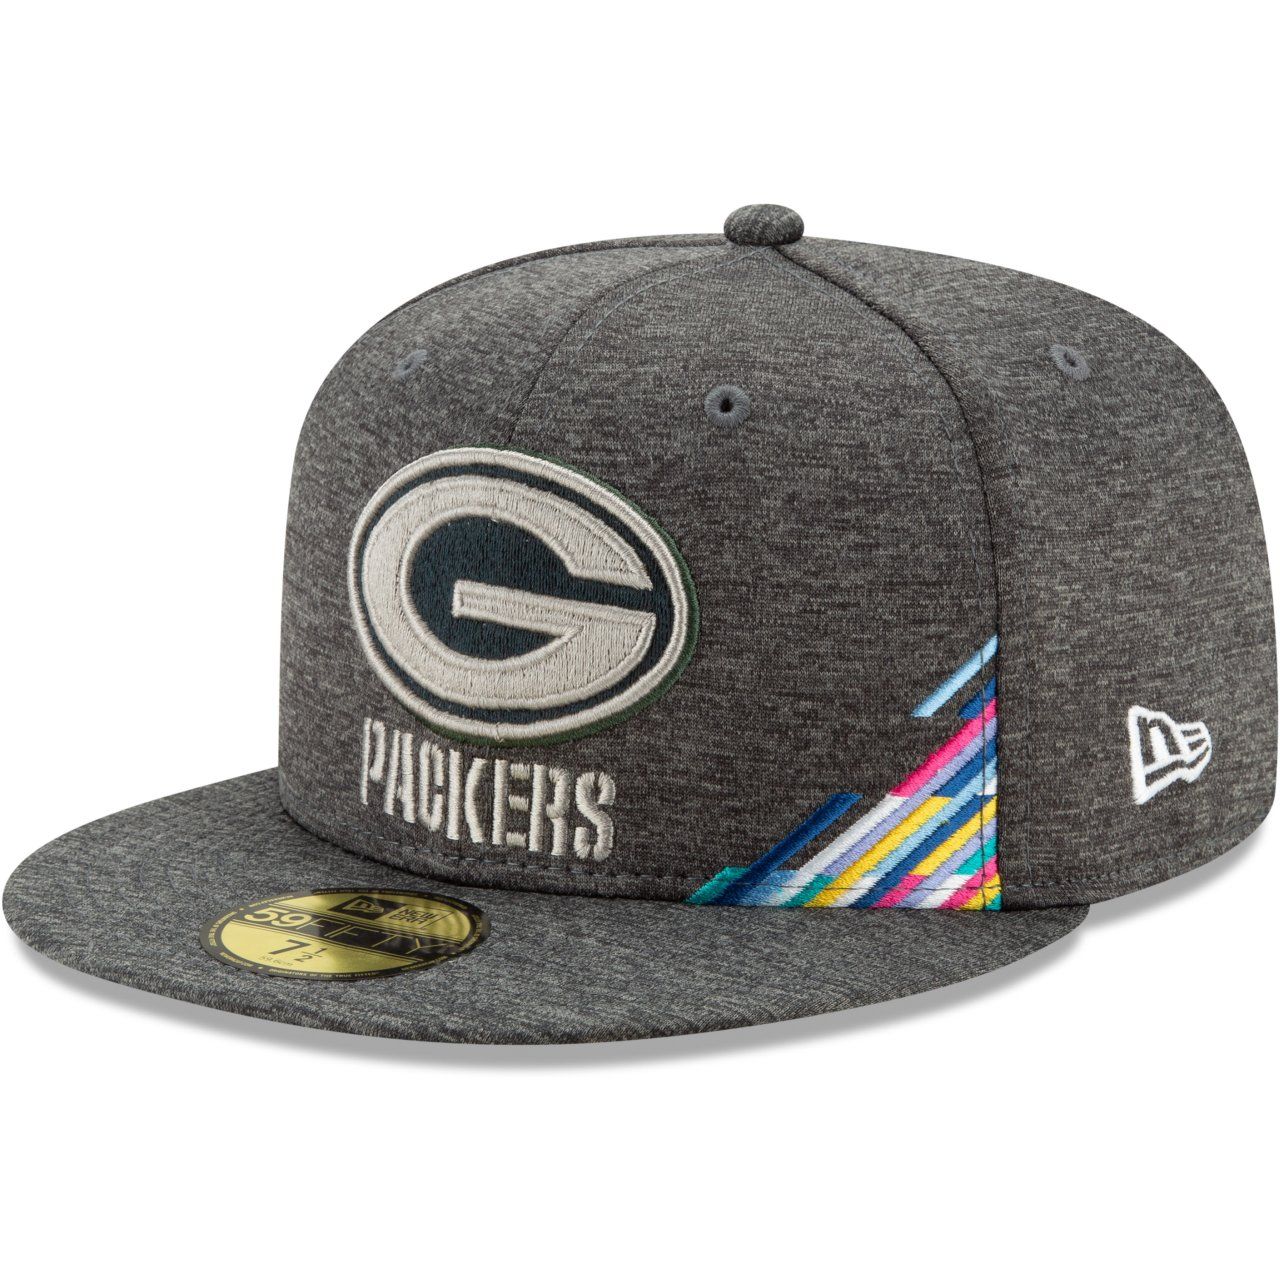 New Era 59Fifty Fitted Cap - CRUCIAL CATCH Green Bay Packers von New Era